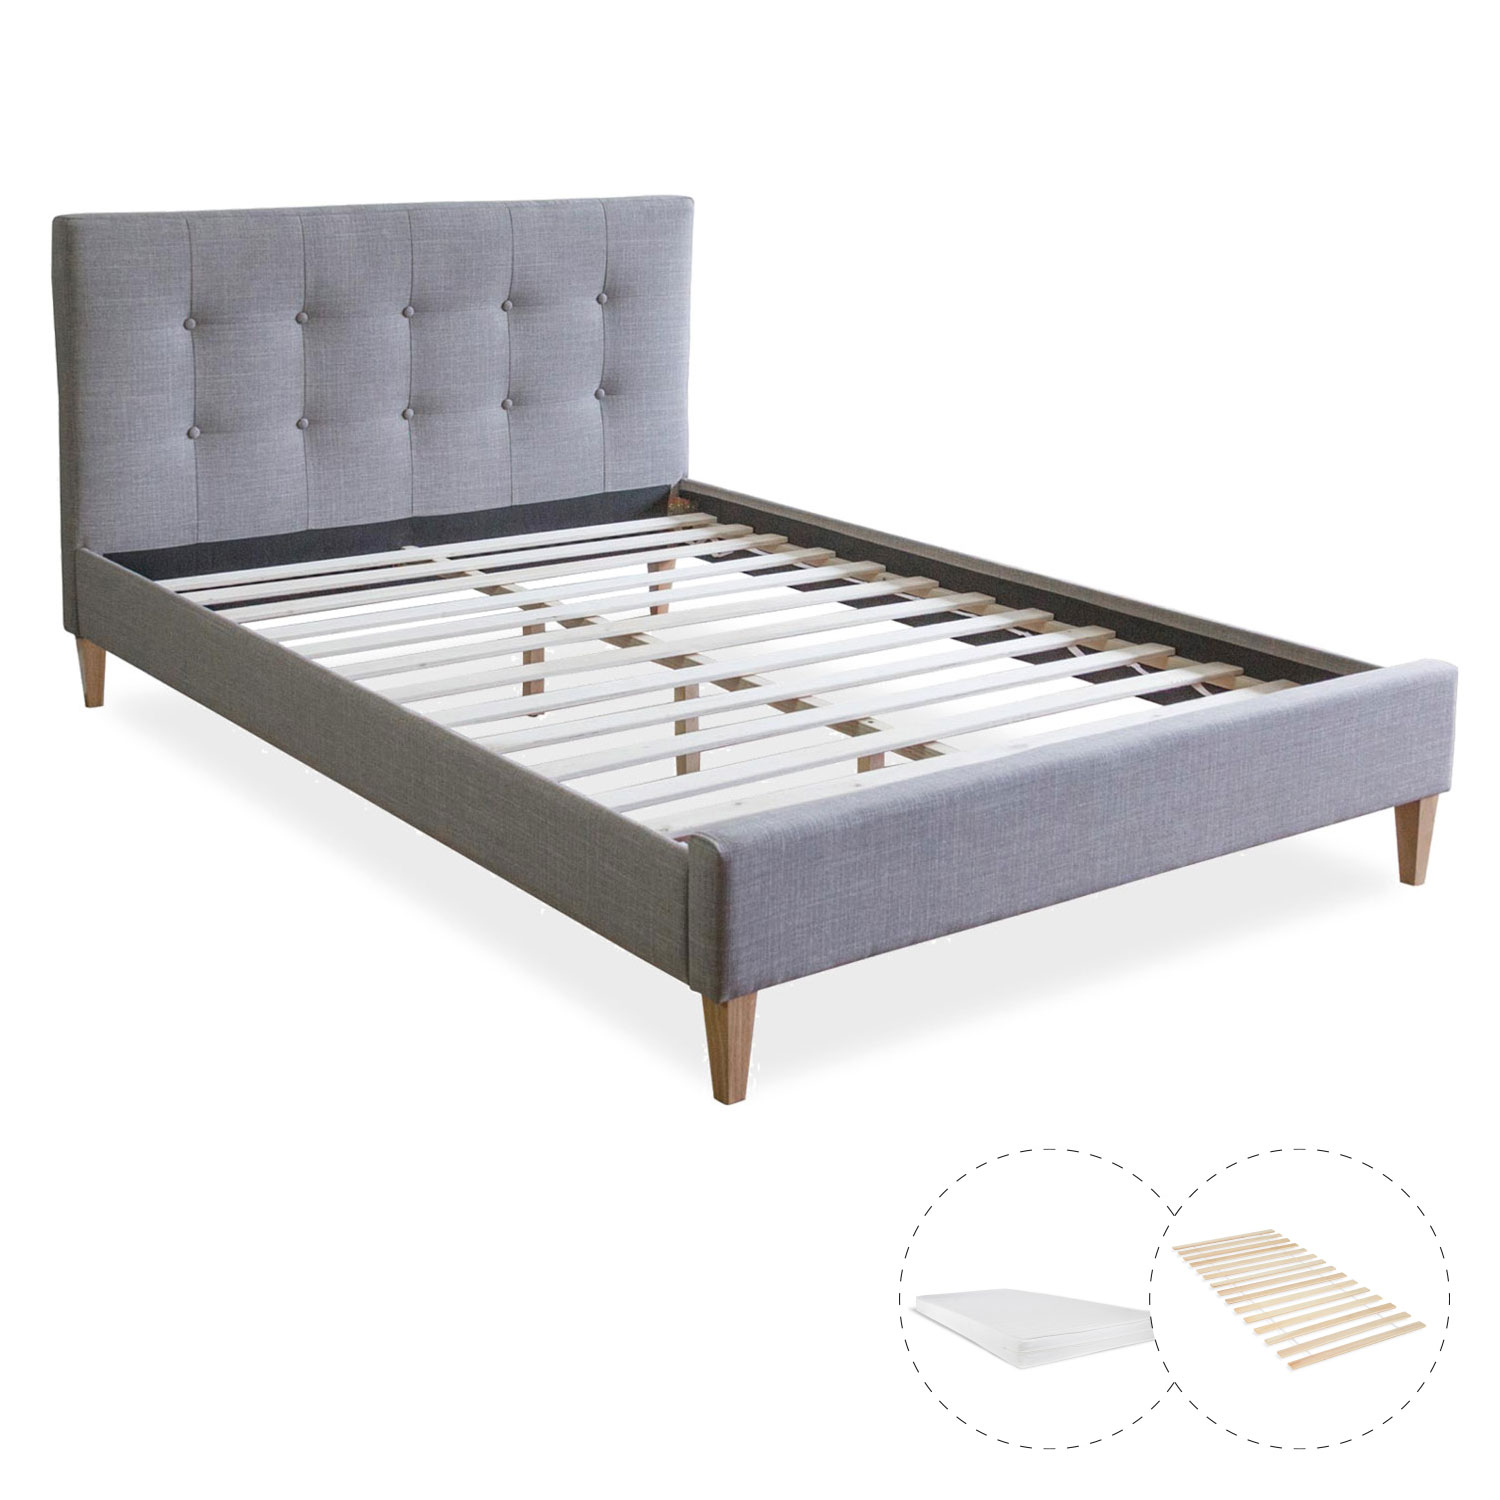 Upholstered Bed with Mattress 140x200 Slatted Frame Double Bed Fabric Bedstead Bed Grey